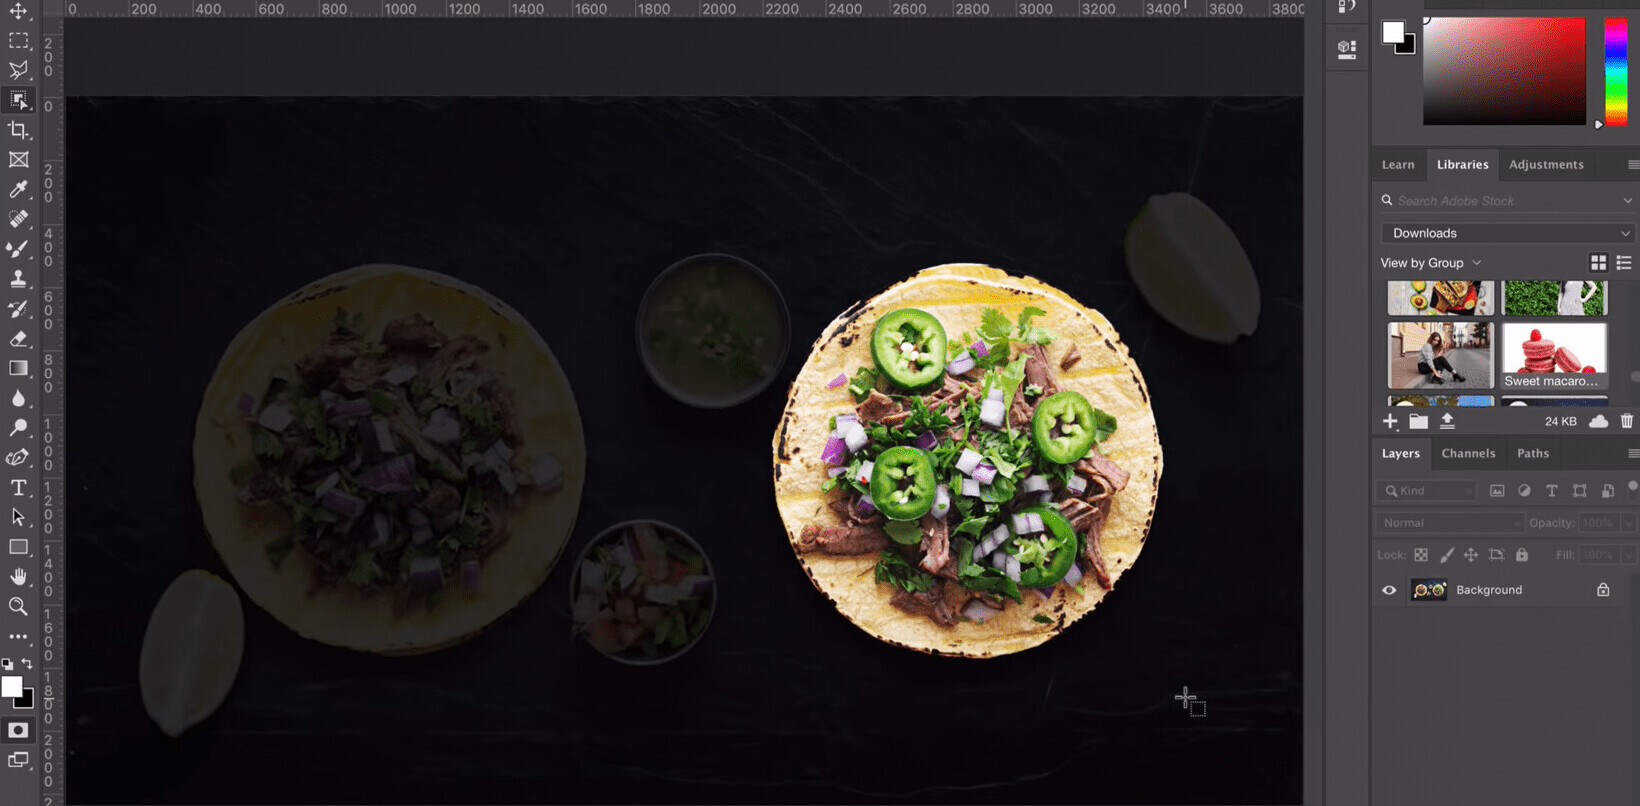 Photoshop’s newest tool makes object selection ridiculously easy